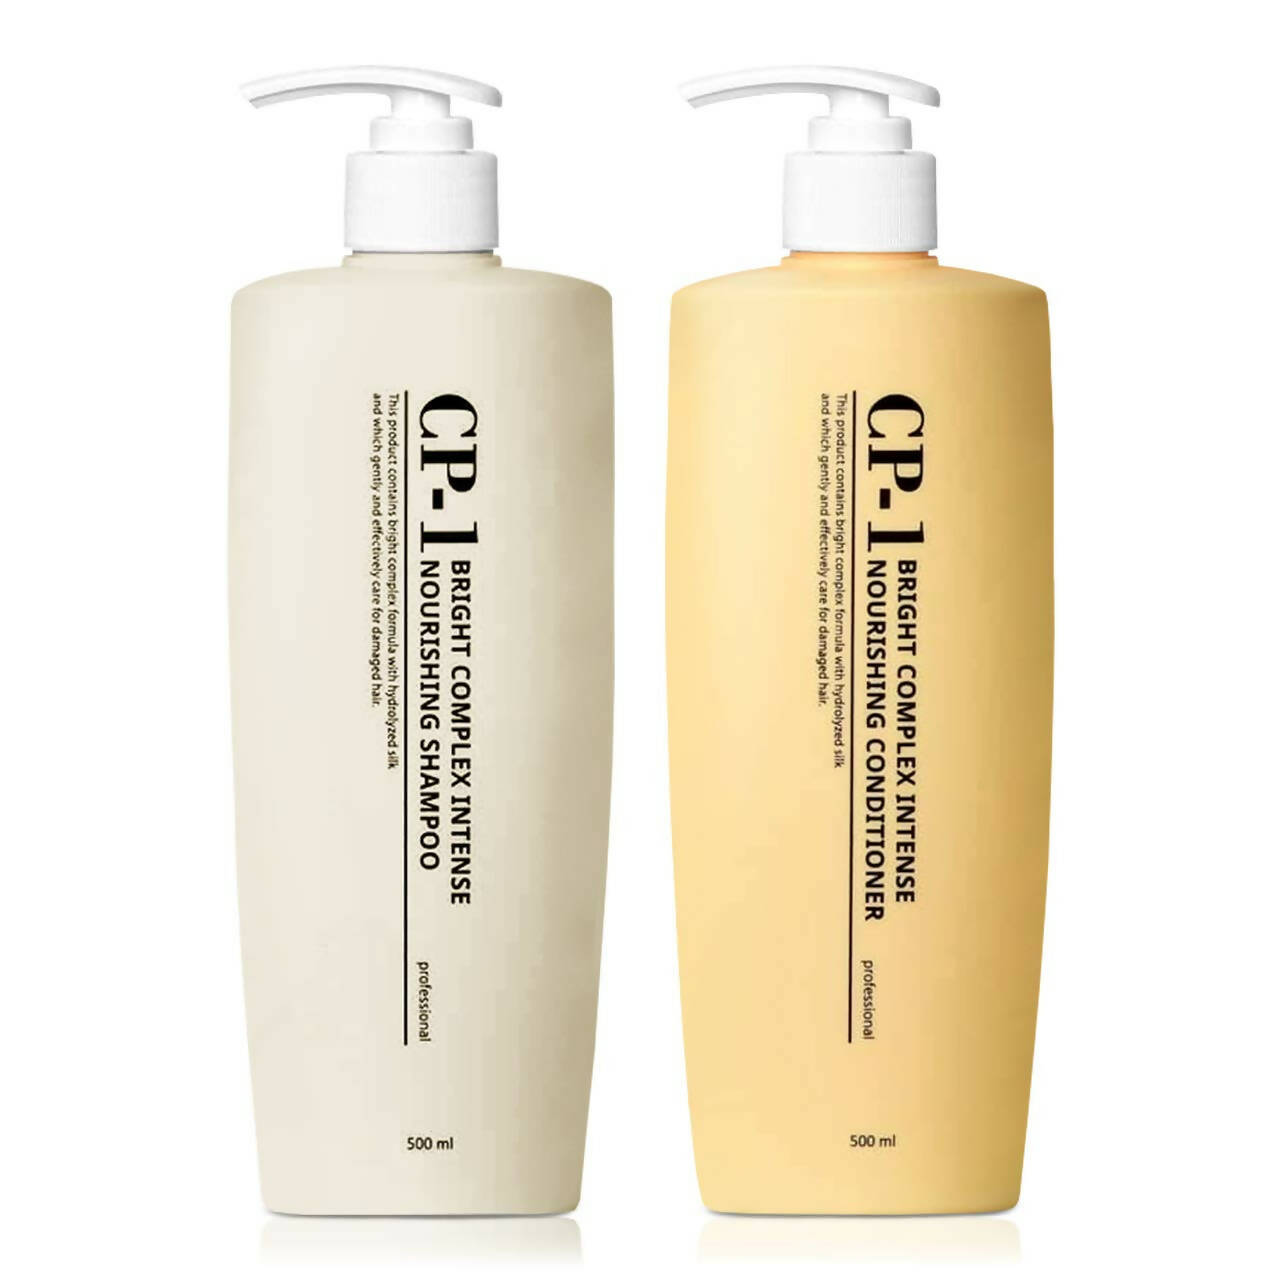 CP-1 Nourishing Shampoo + Conditioner 500ml SET Korean Beauty for Dry Damaged Hair with Premium Keratin, Protein, Spa Products